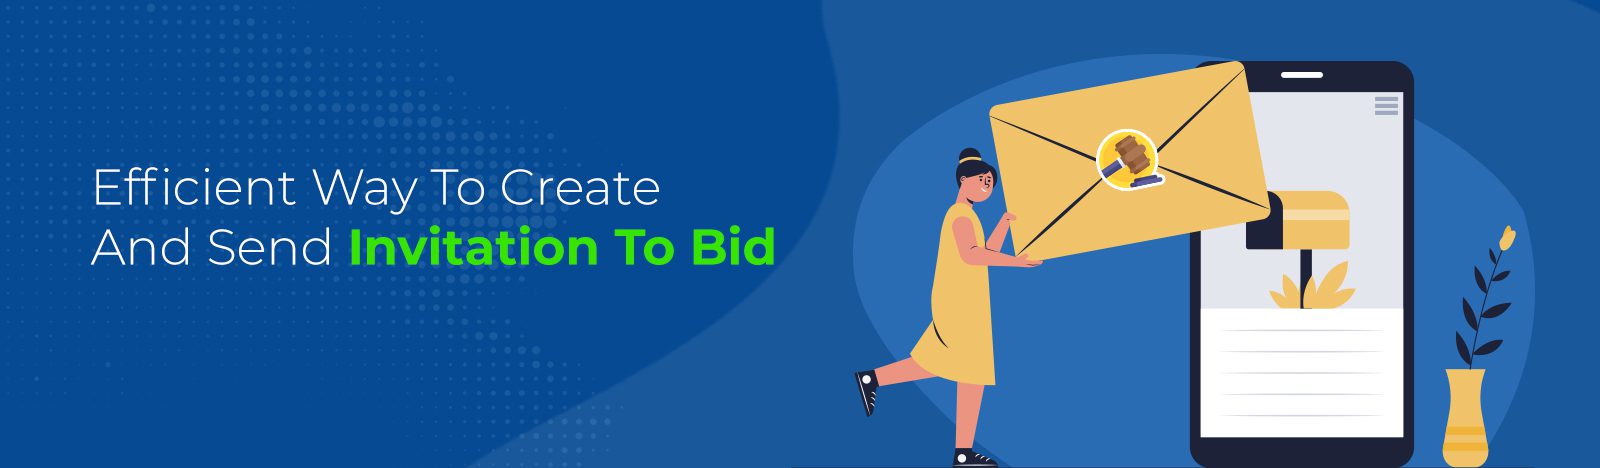 Efficient Way To Create And Send Invitation For Bid